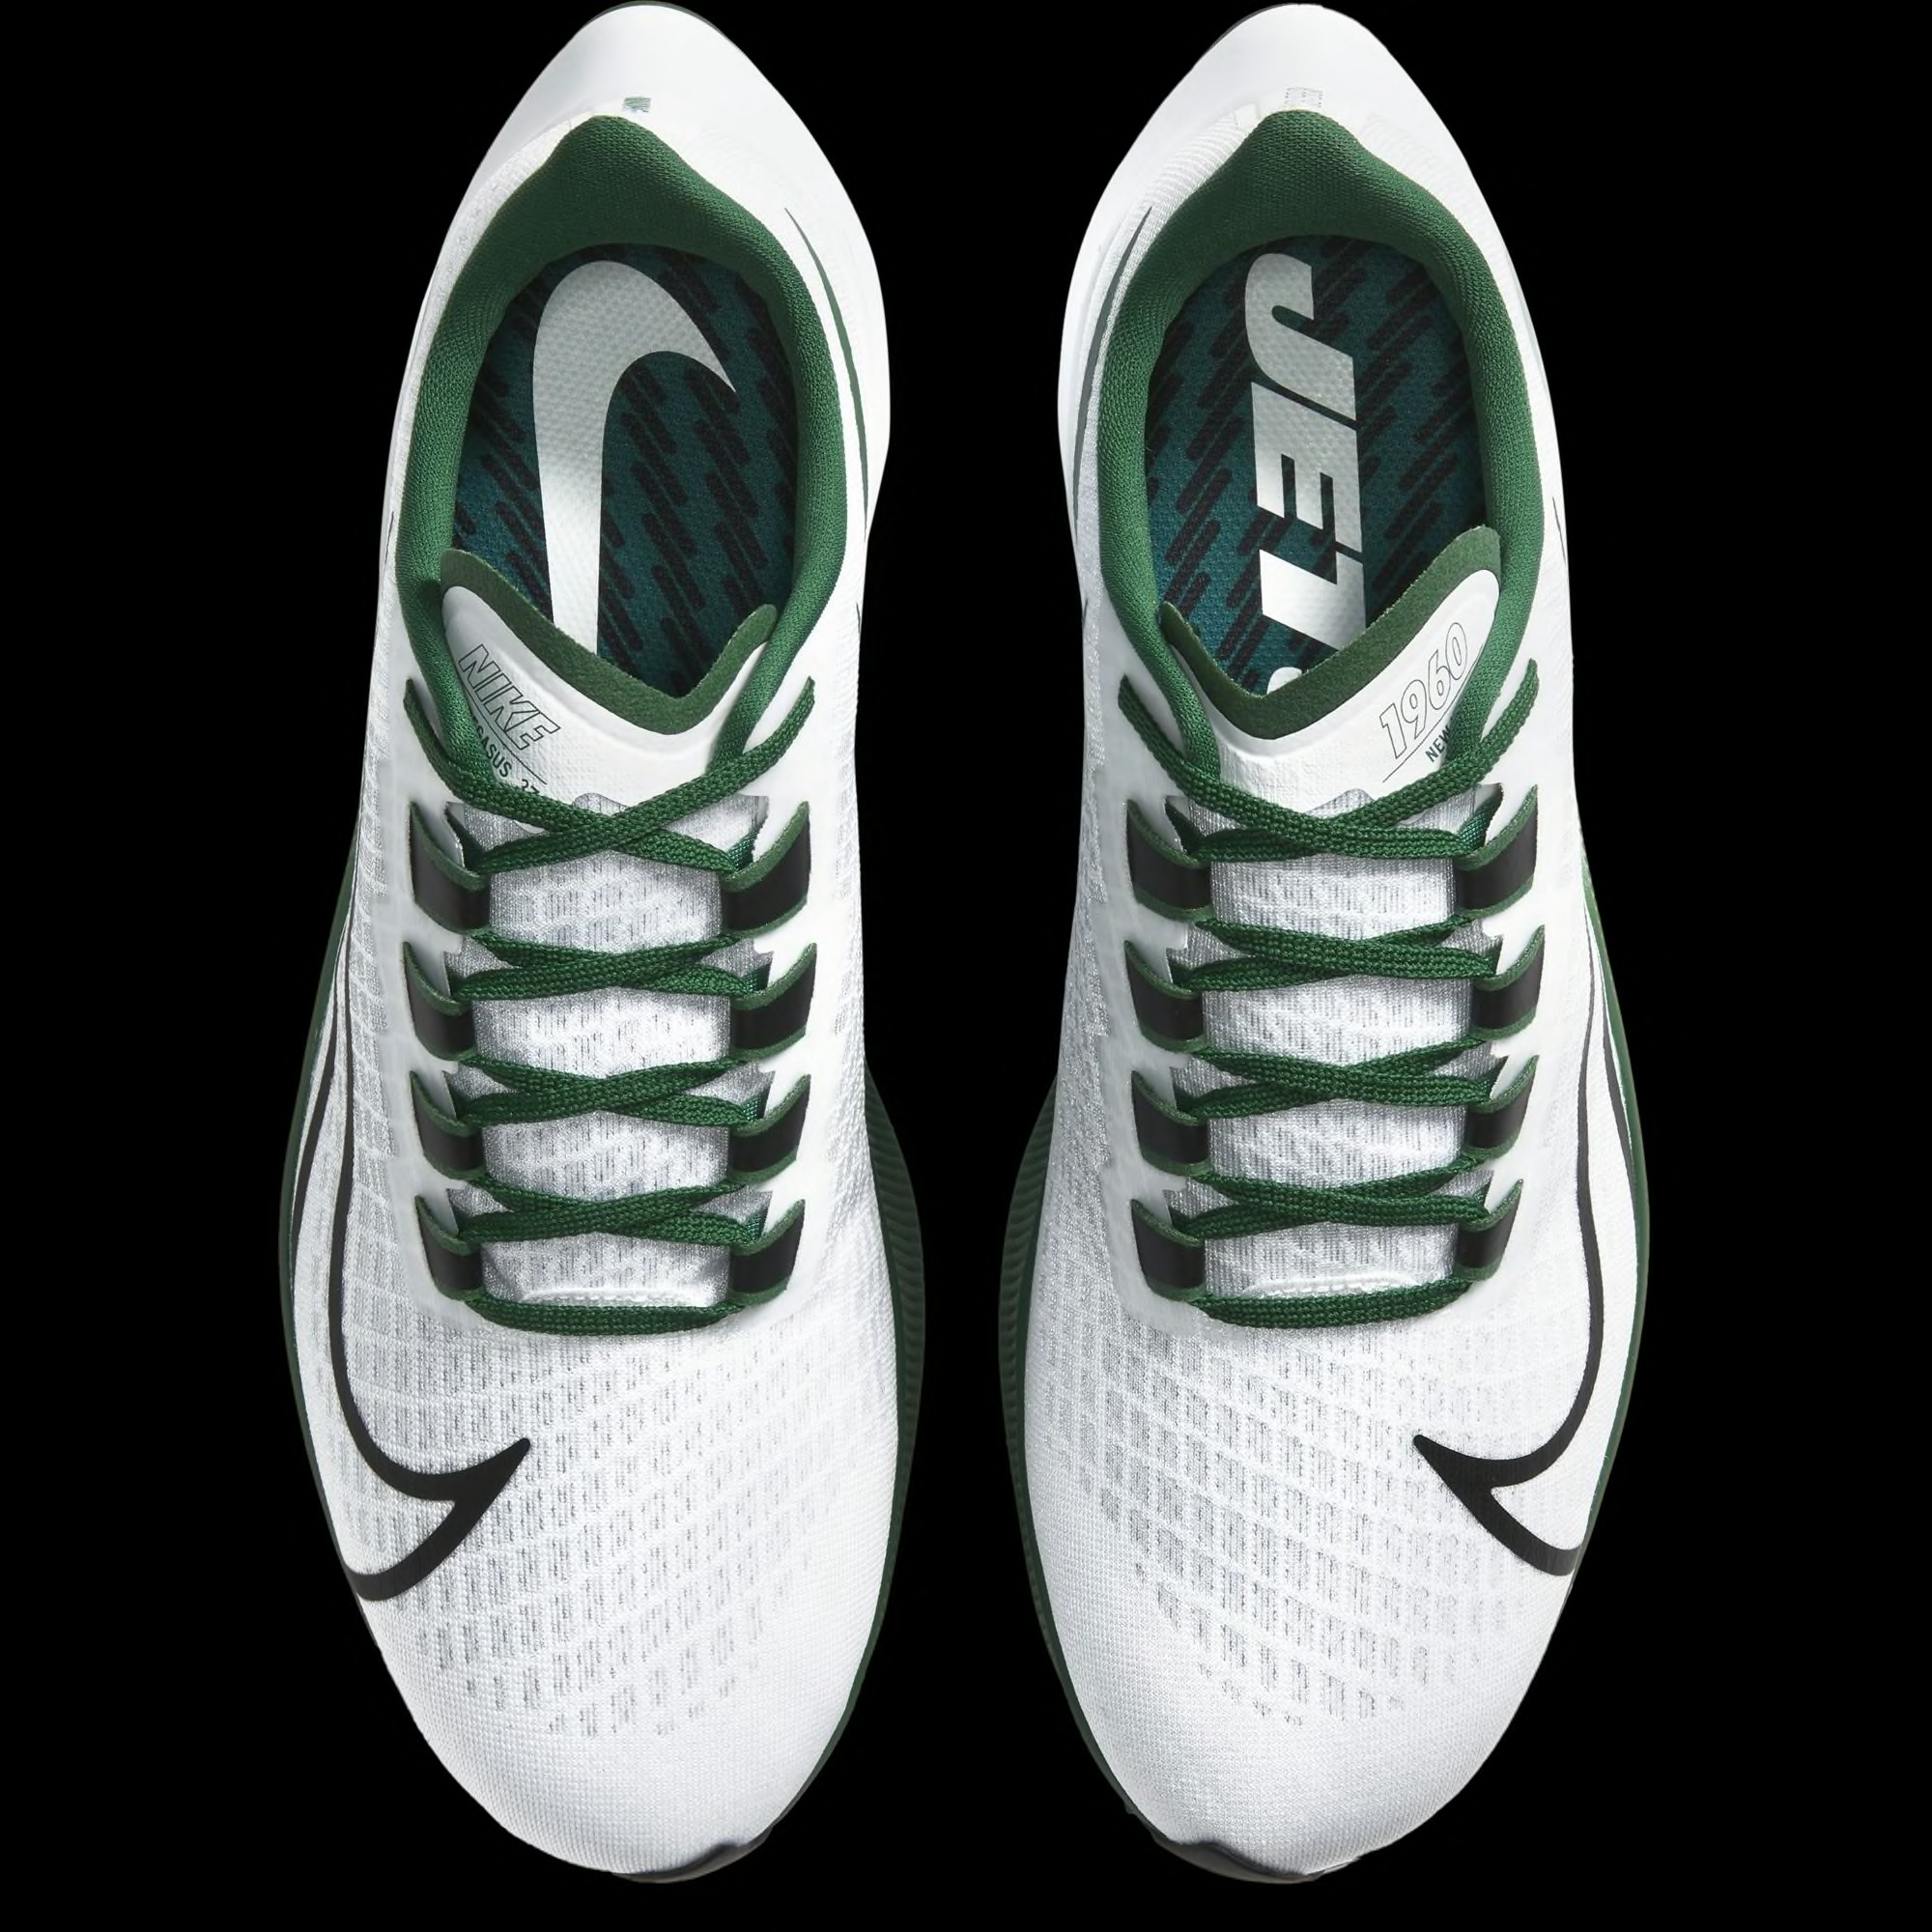 These New York Jets Nike running shoes 